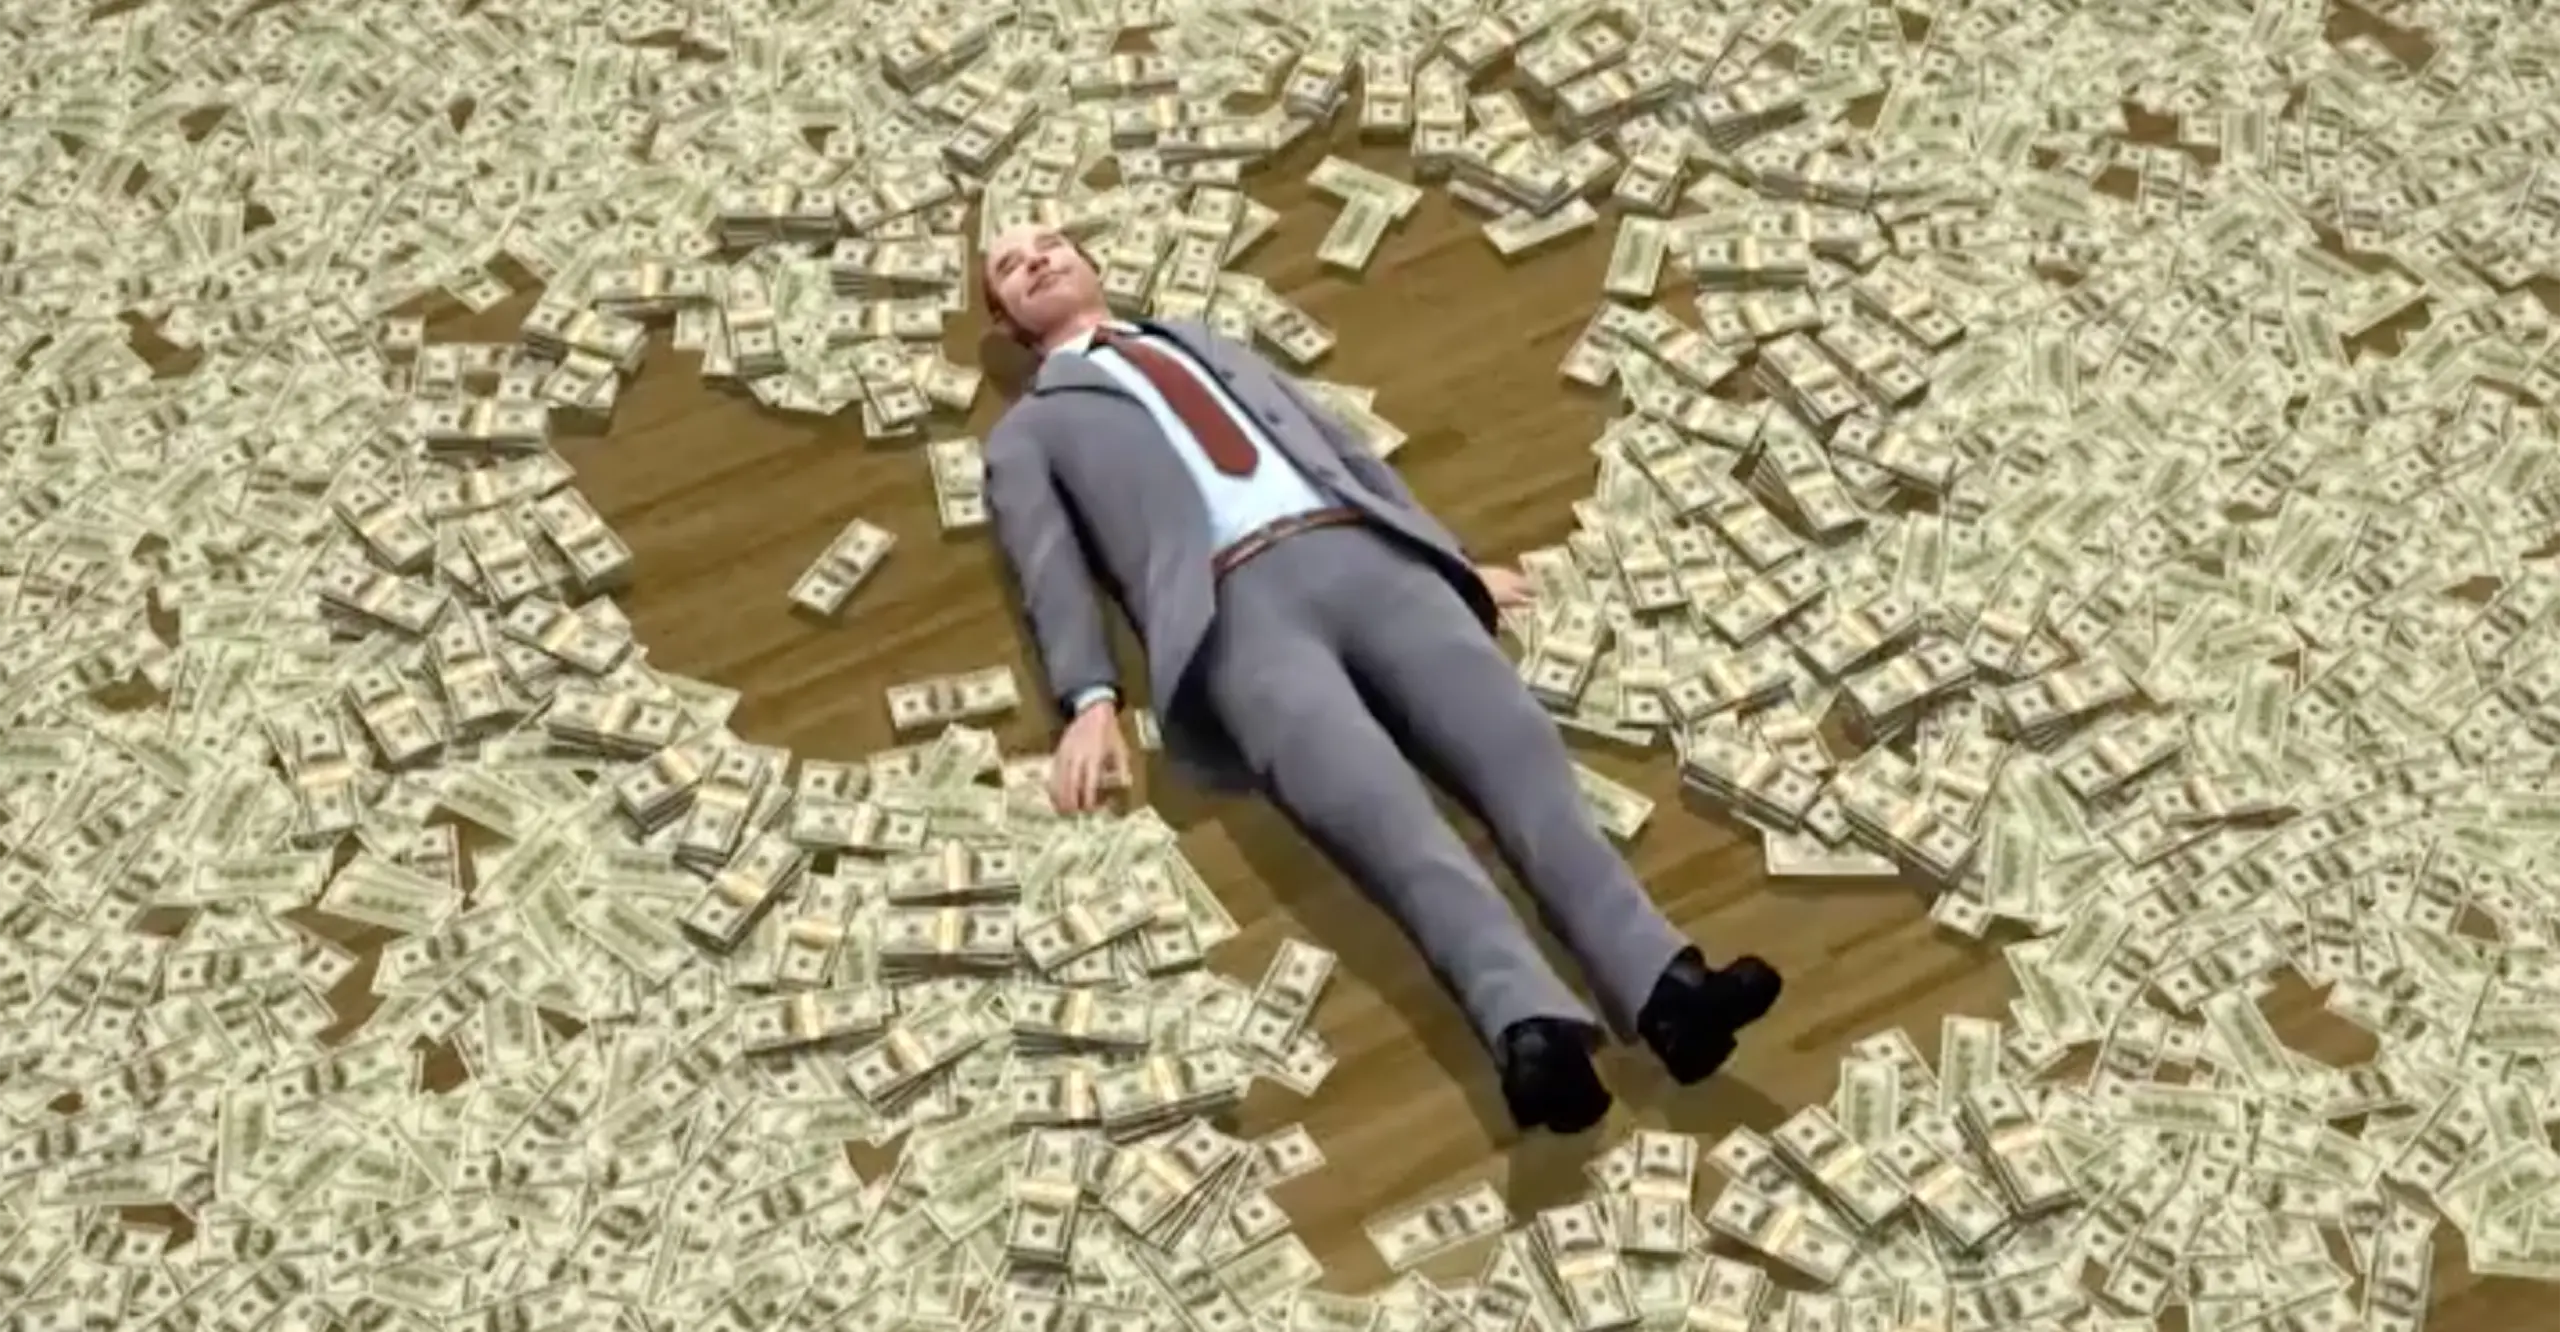 A man lying on the floor with money.